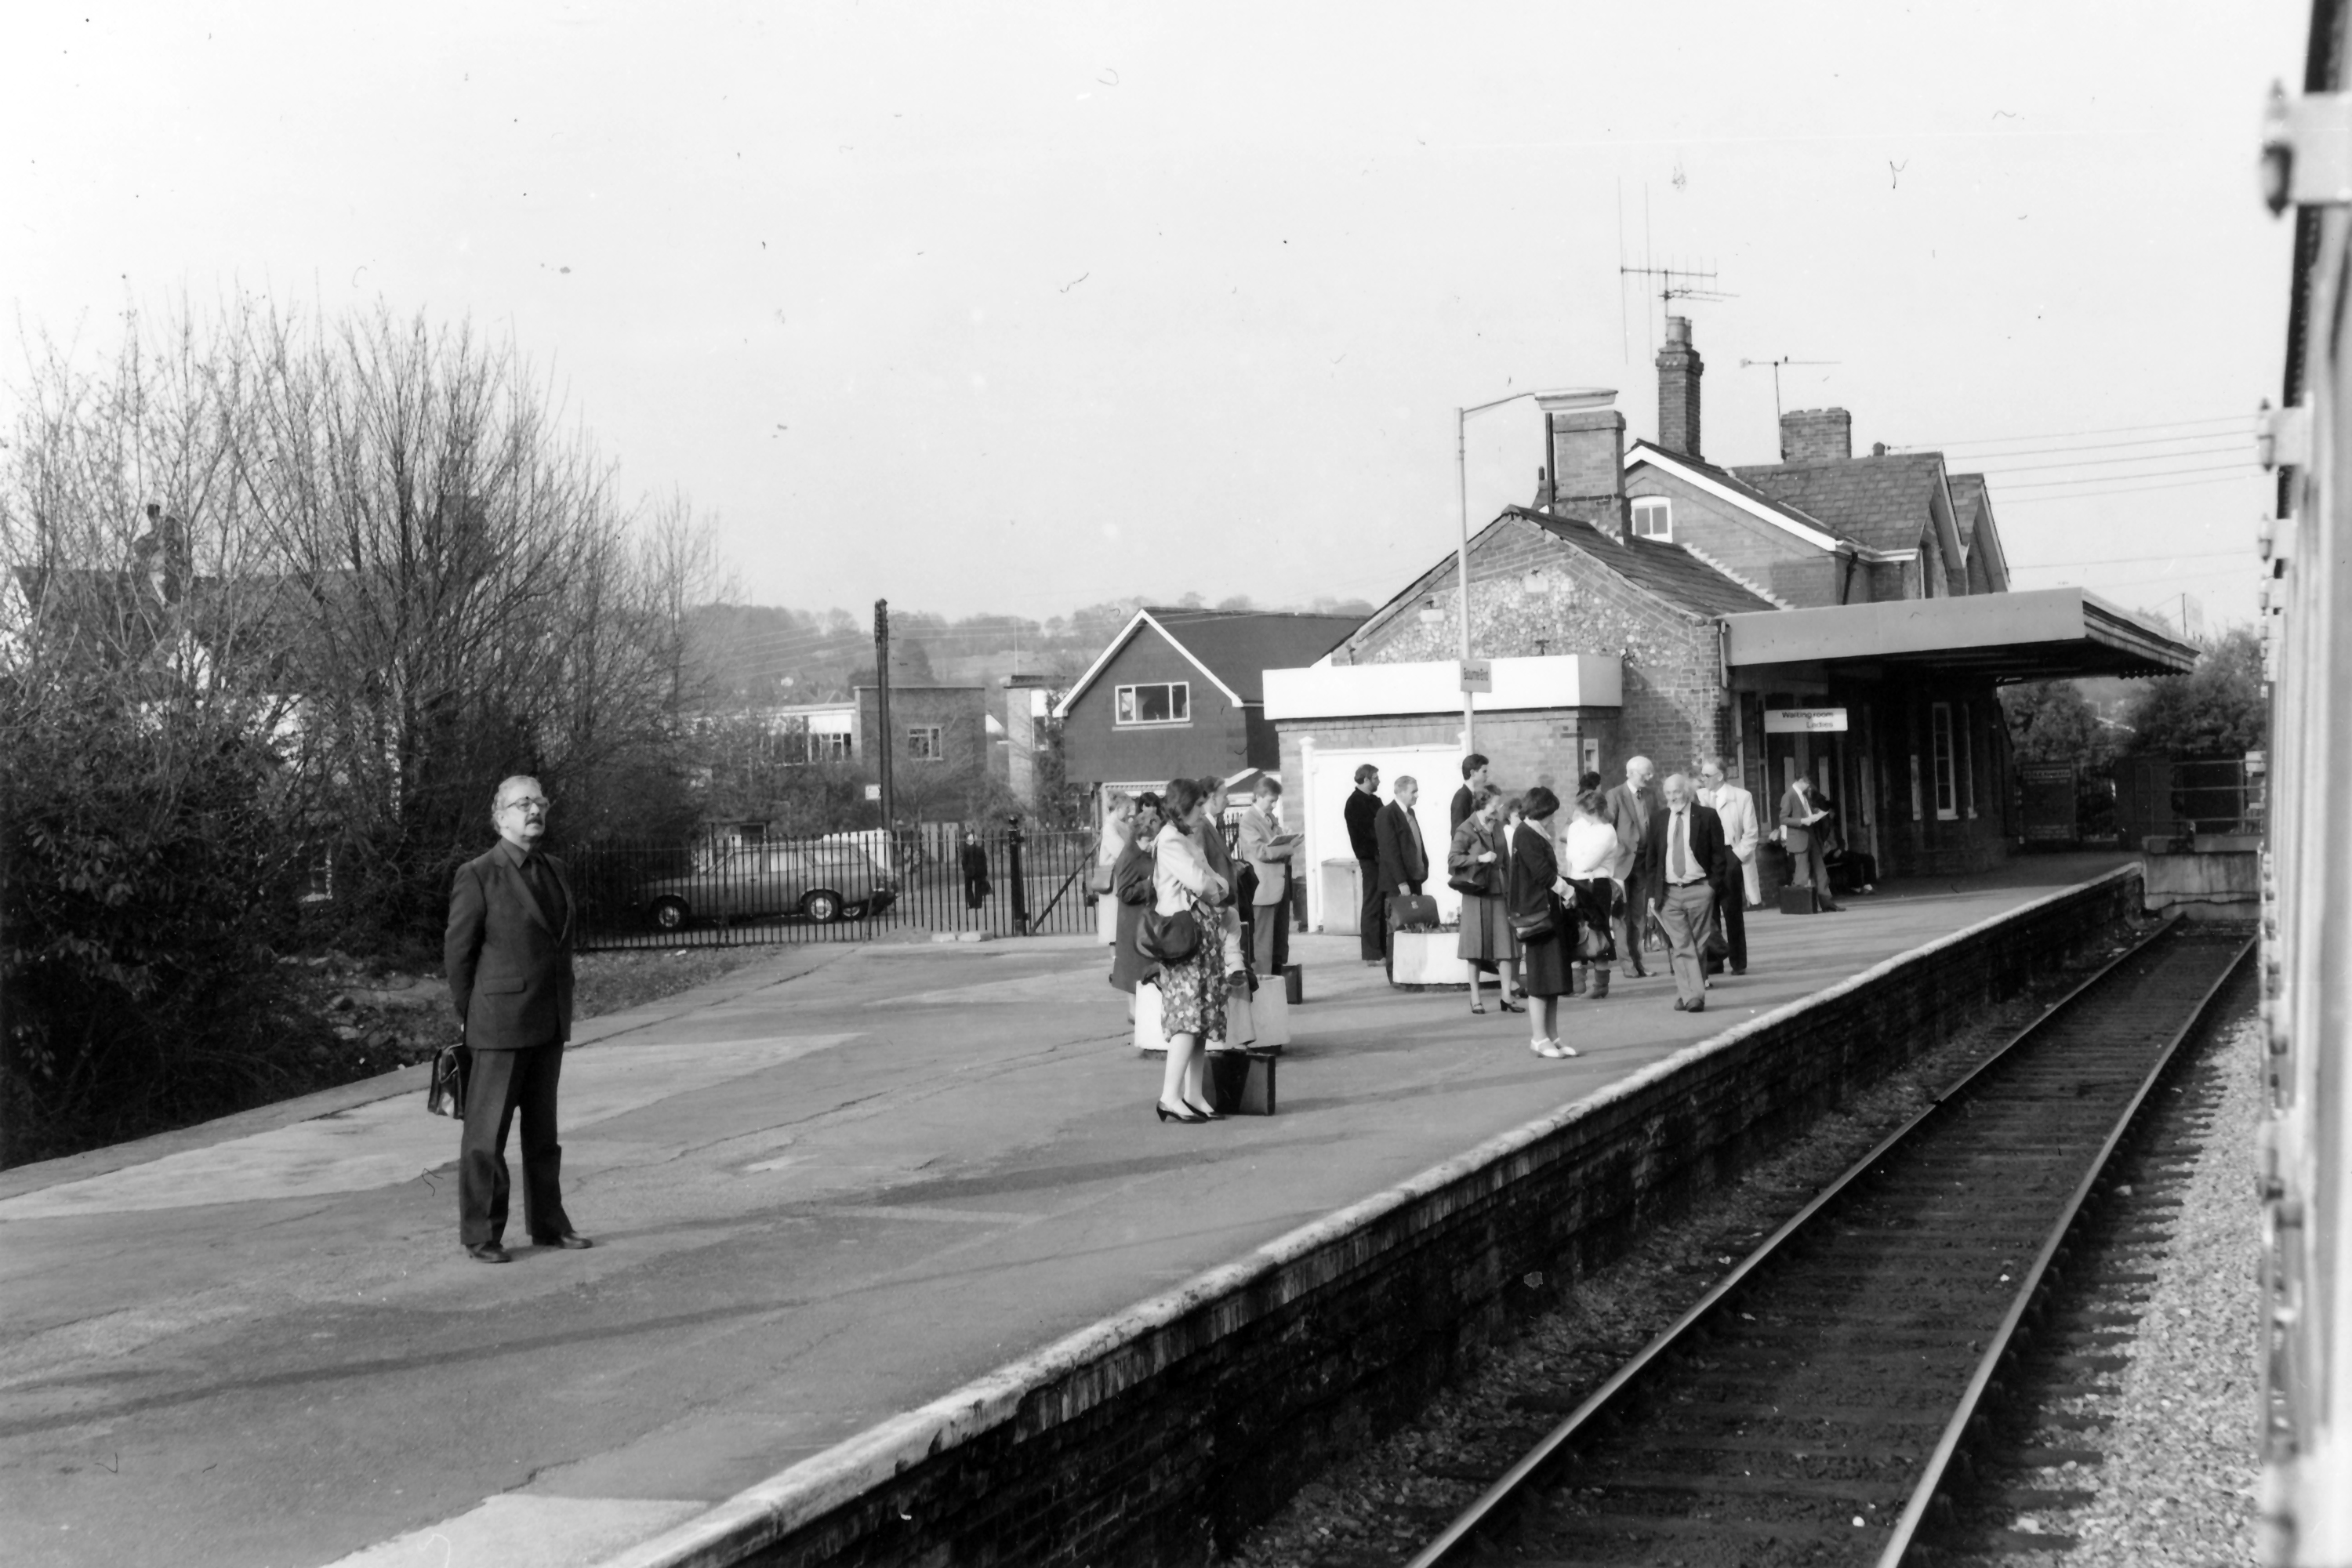 Passengers await the Marlow connection at Bourne End